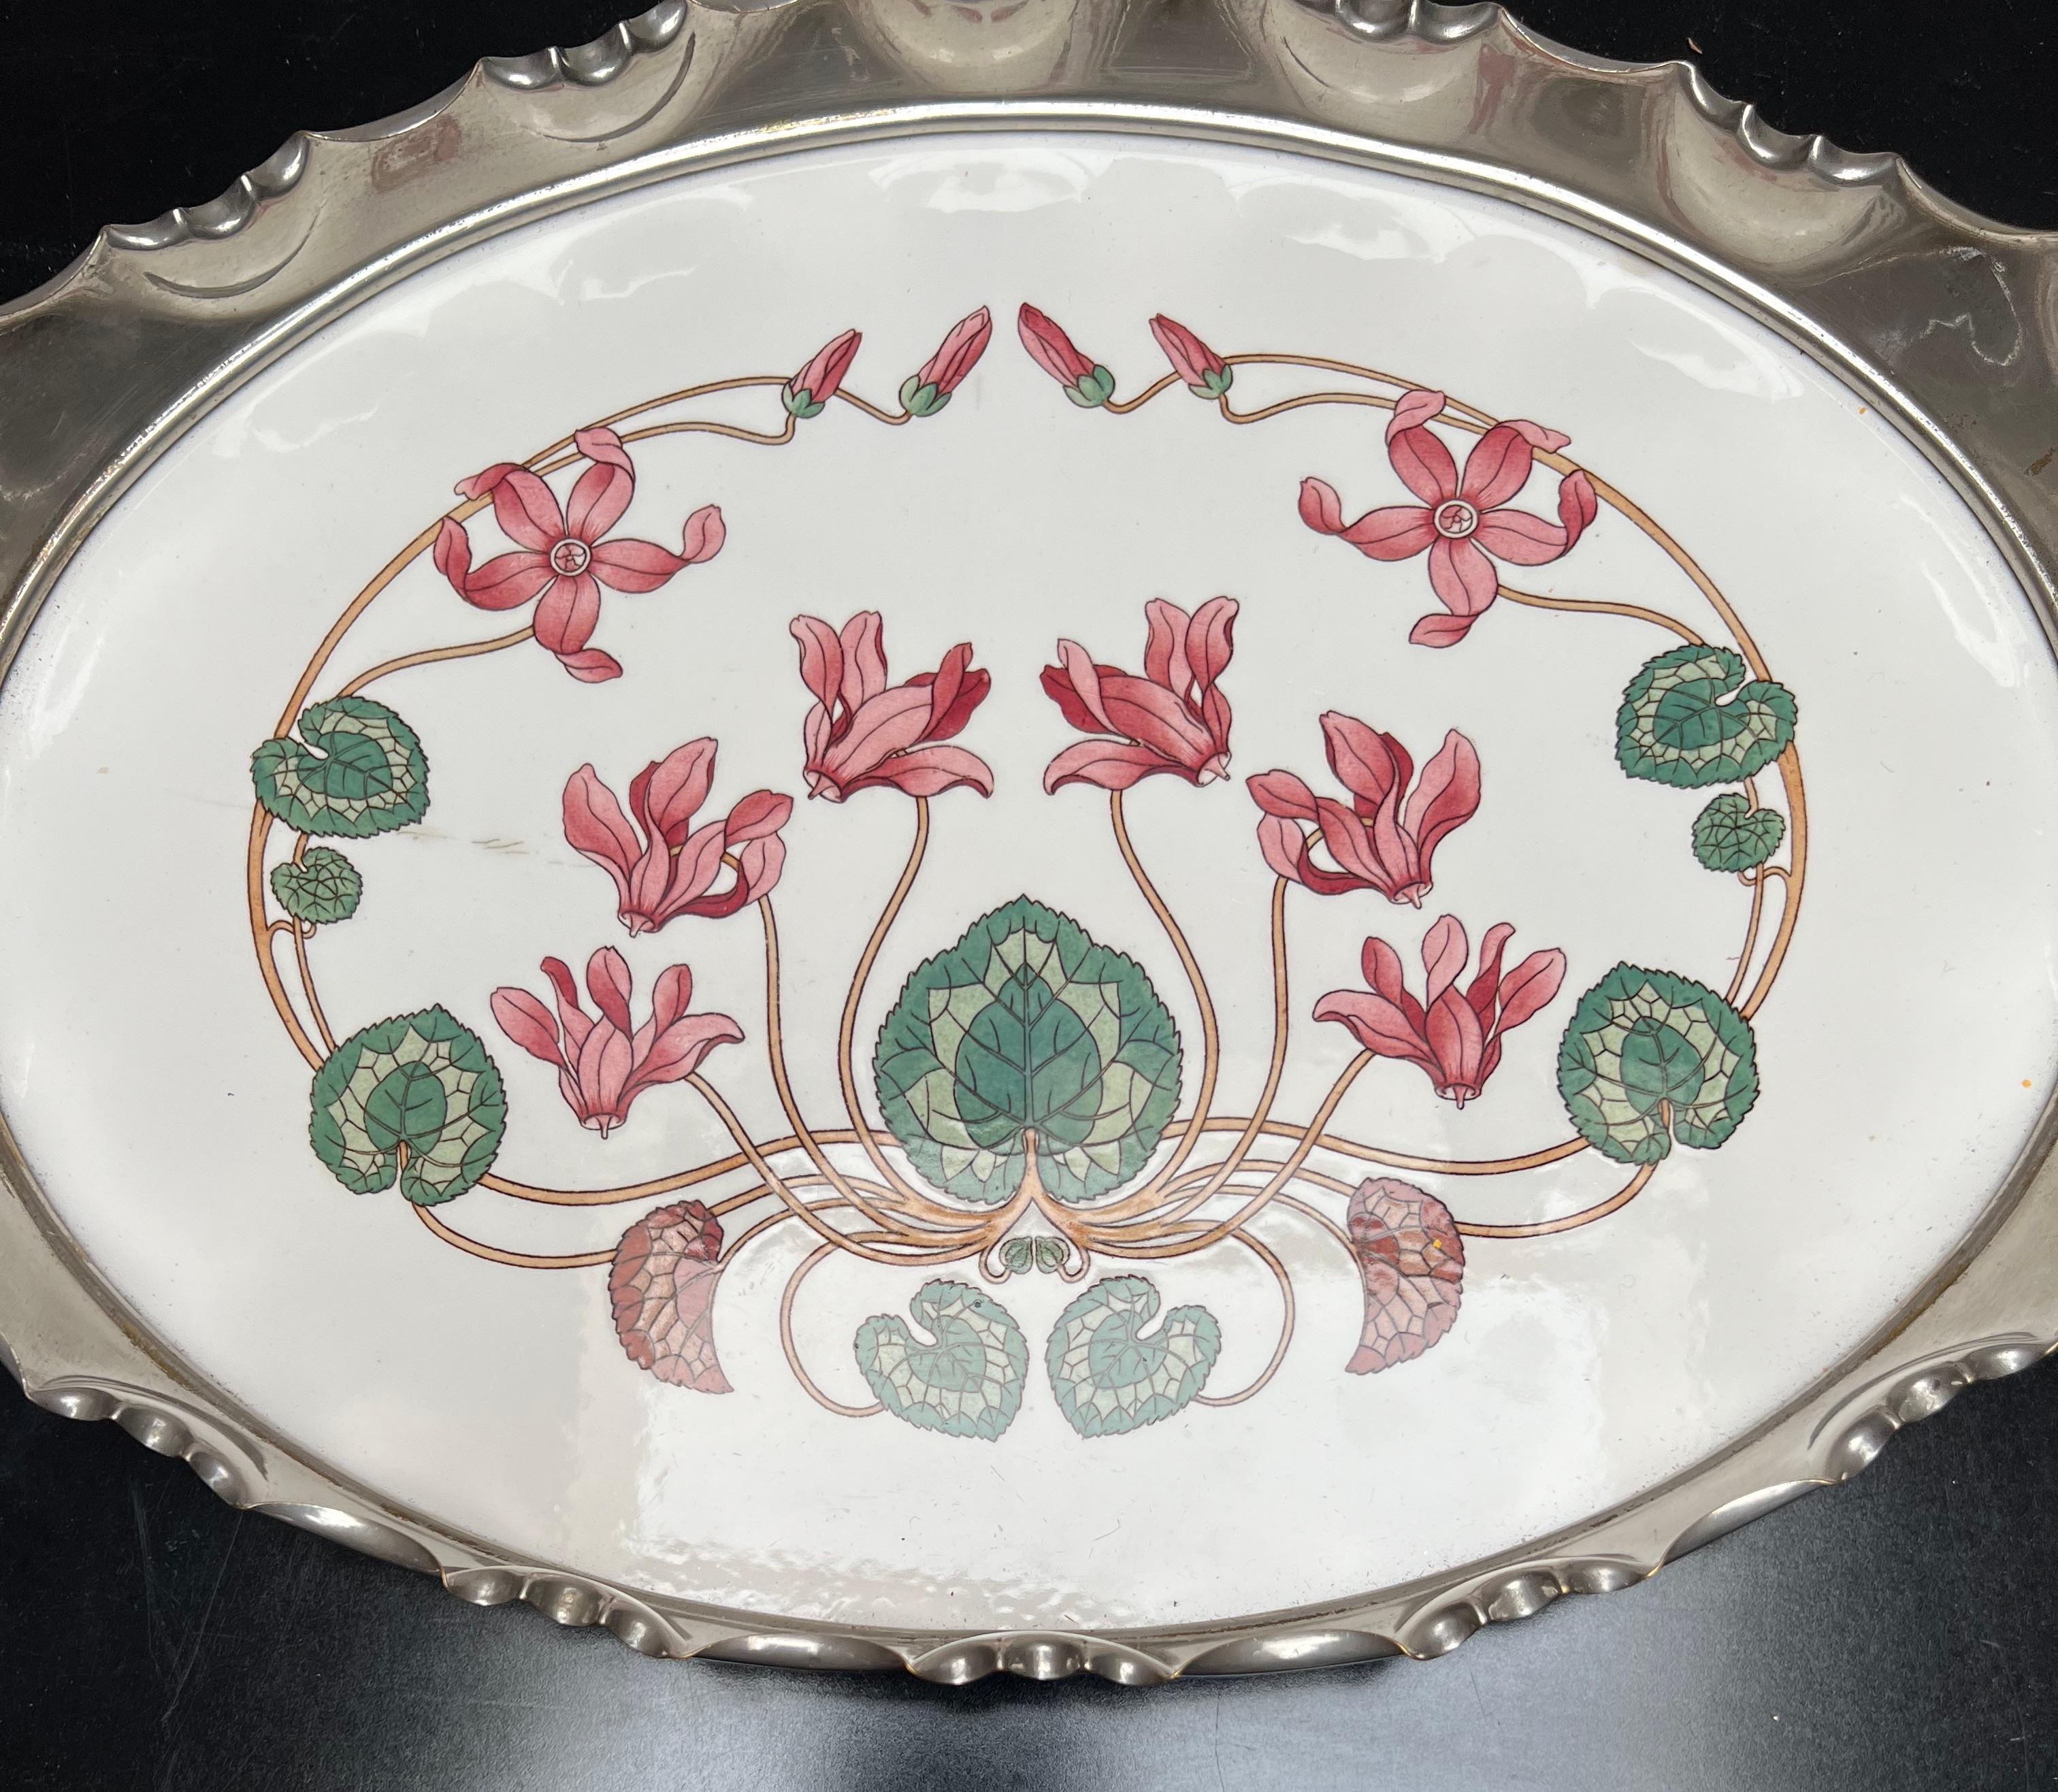 Rare and beautifully hand painted porcelain tile in chrome metal frame serving tray.

This beautiful quality, oval shaped tile serving tray is an absolute joy to own and to look at. It is a smaller than average specimen and apart from some minor